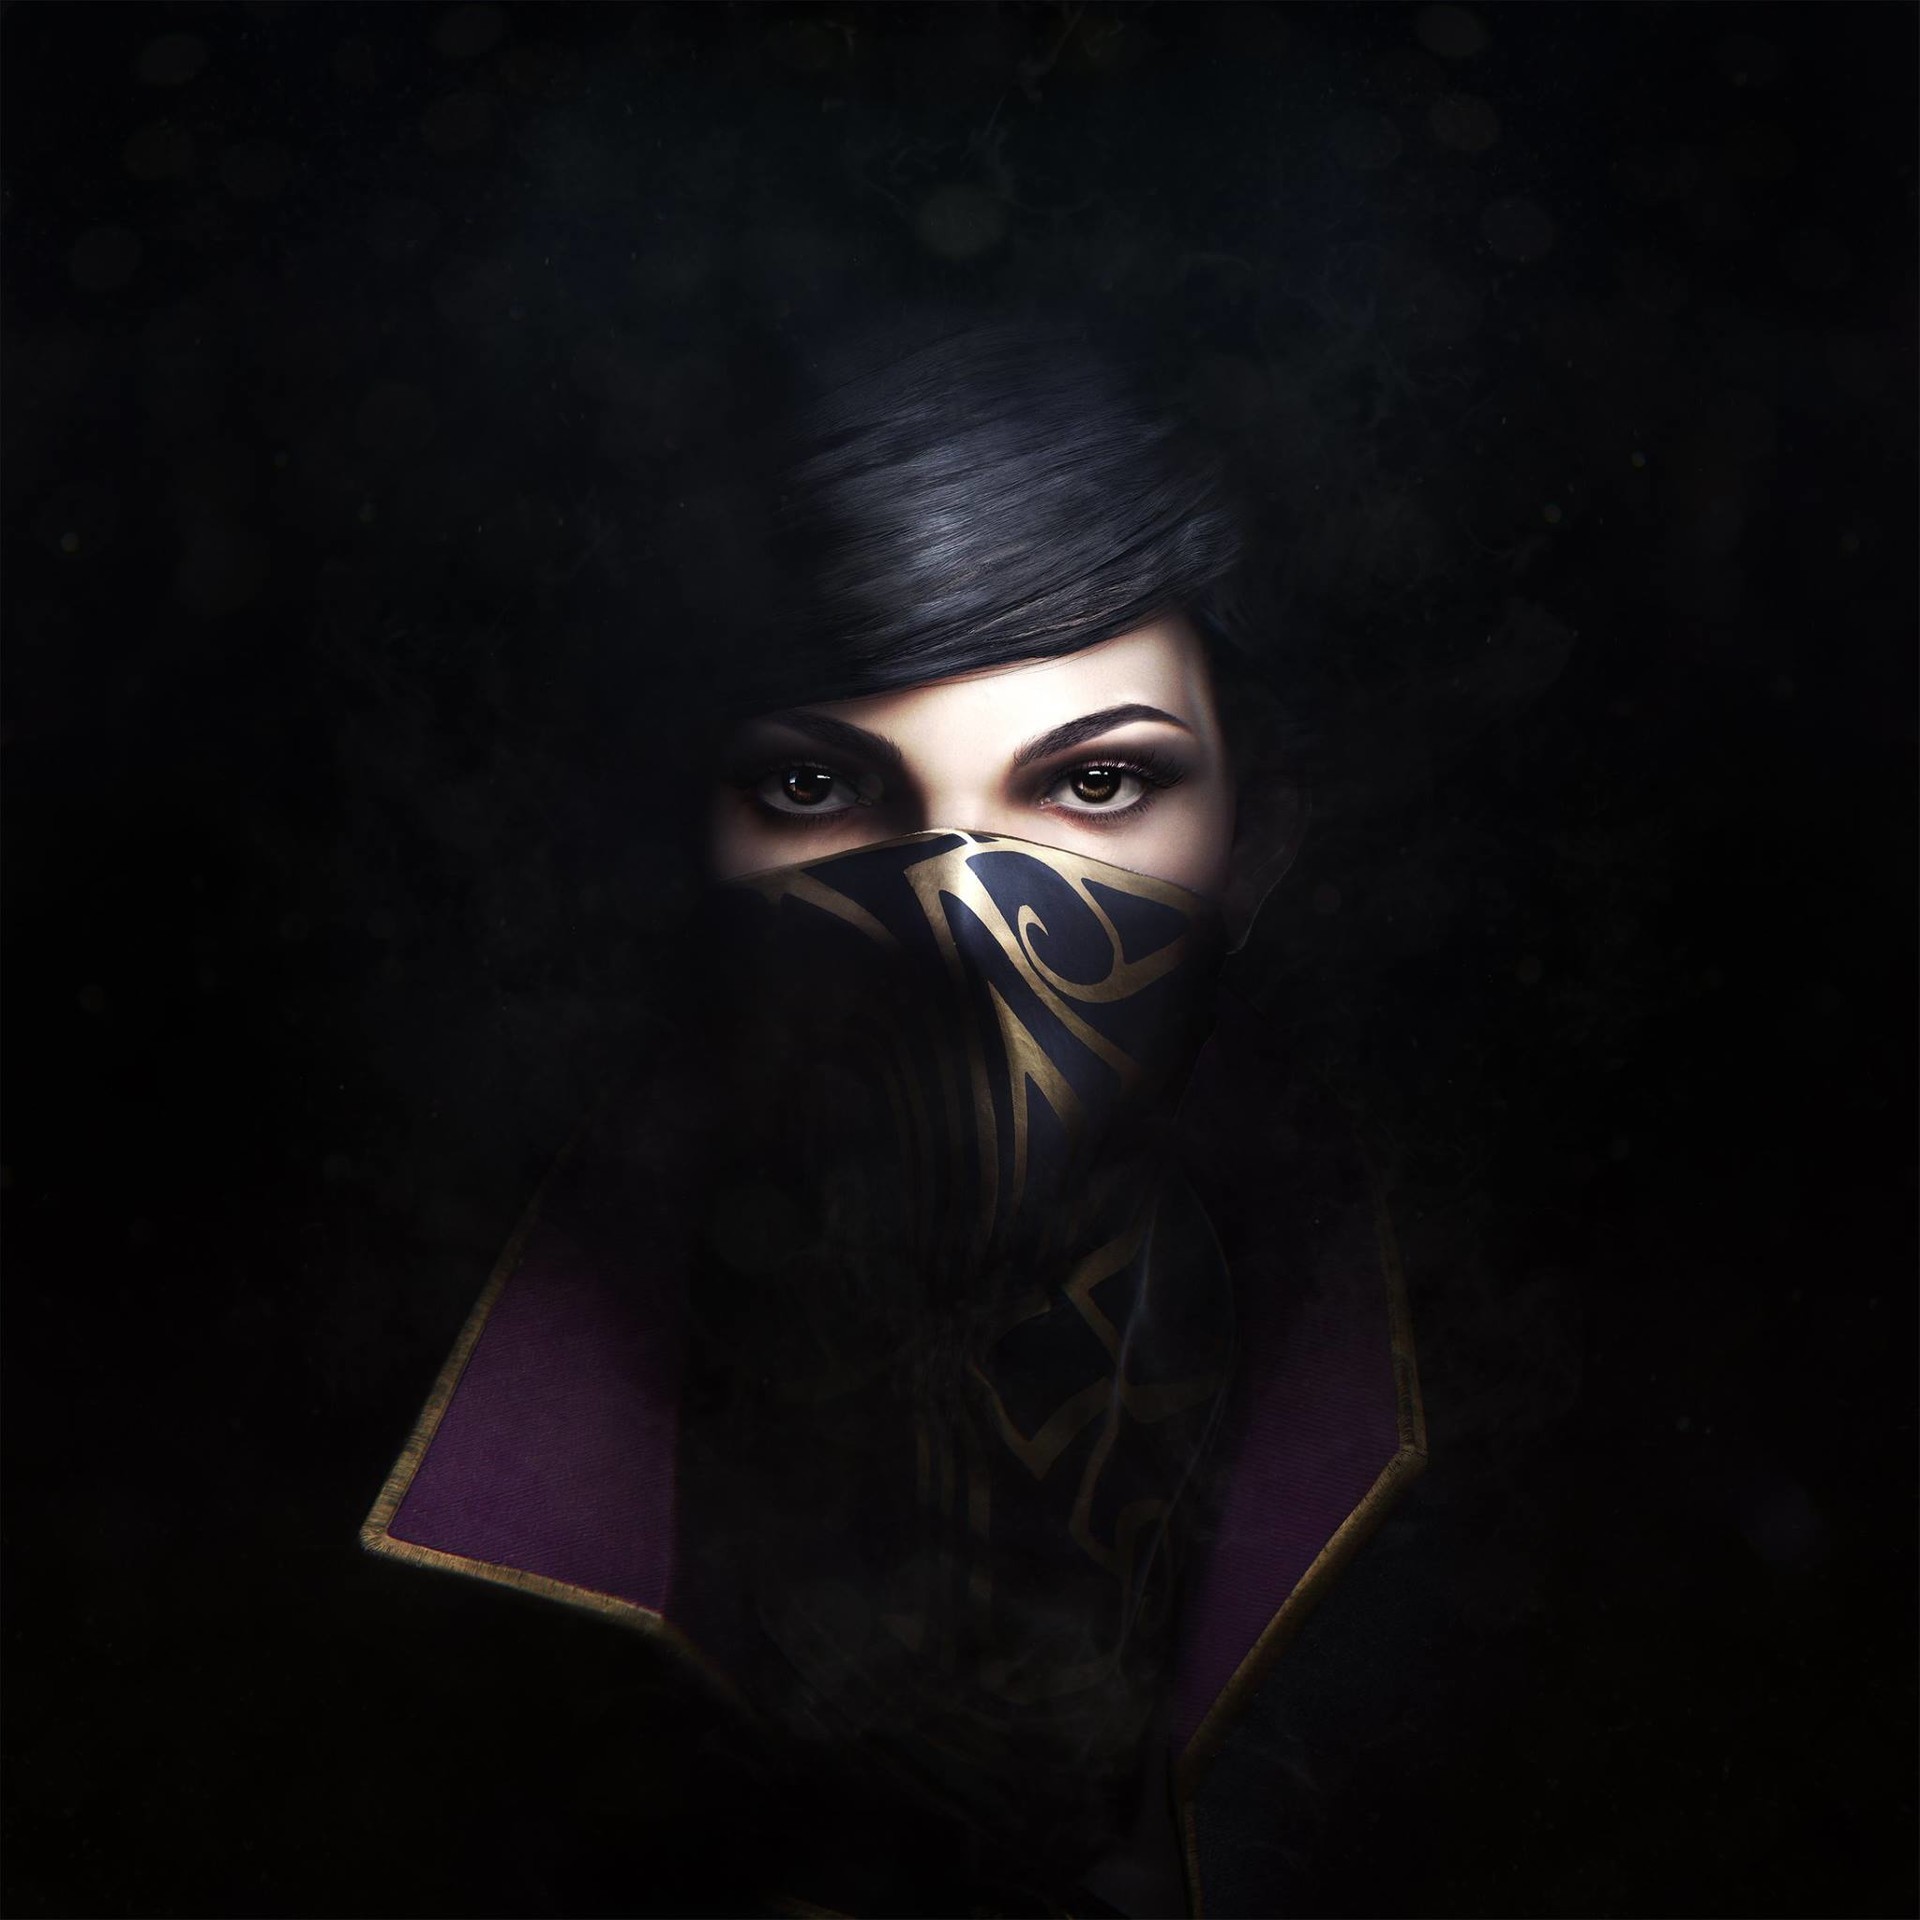 dishonored 2, Video games, Dishonored Wallpaper